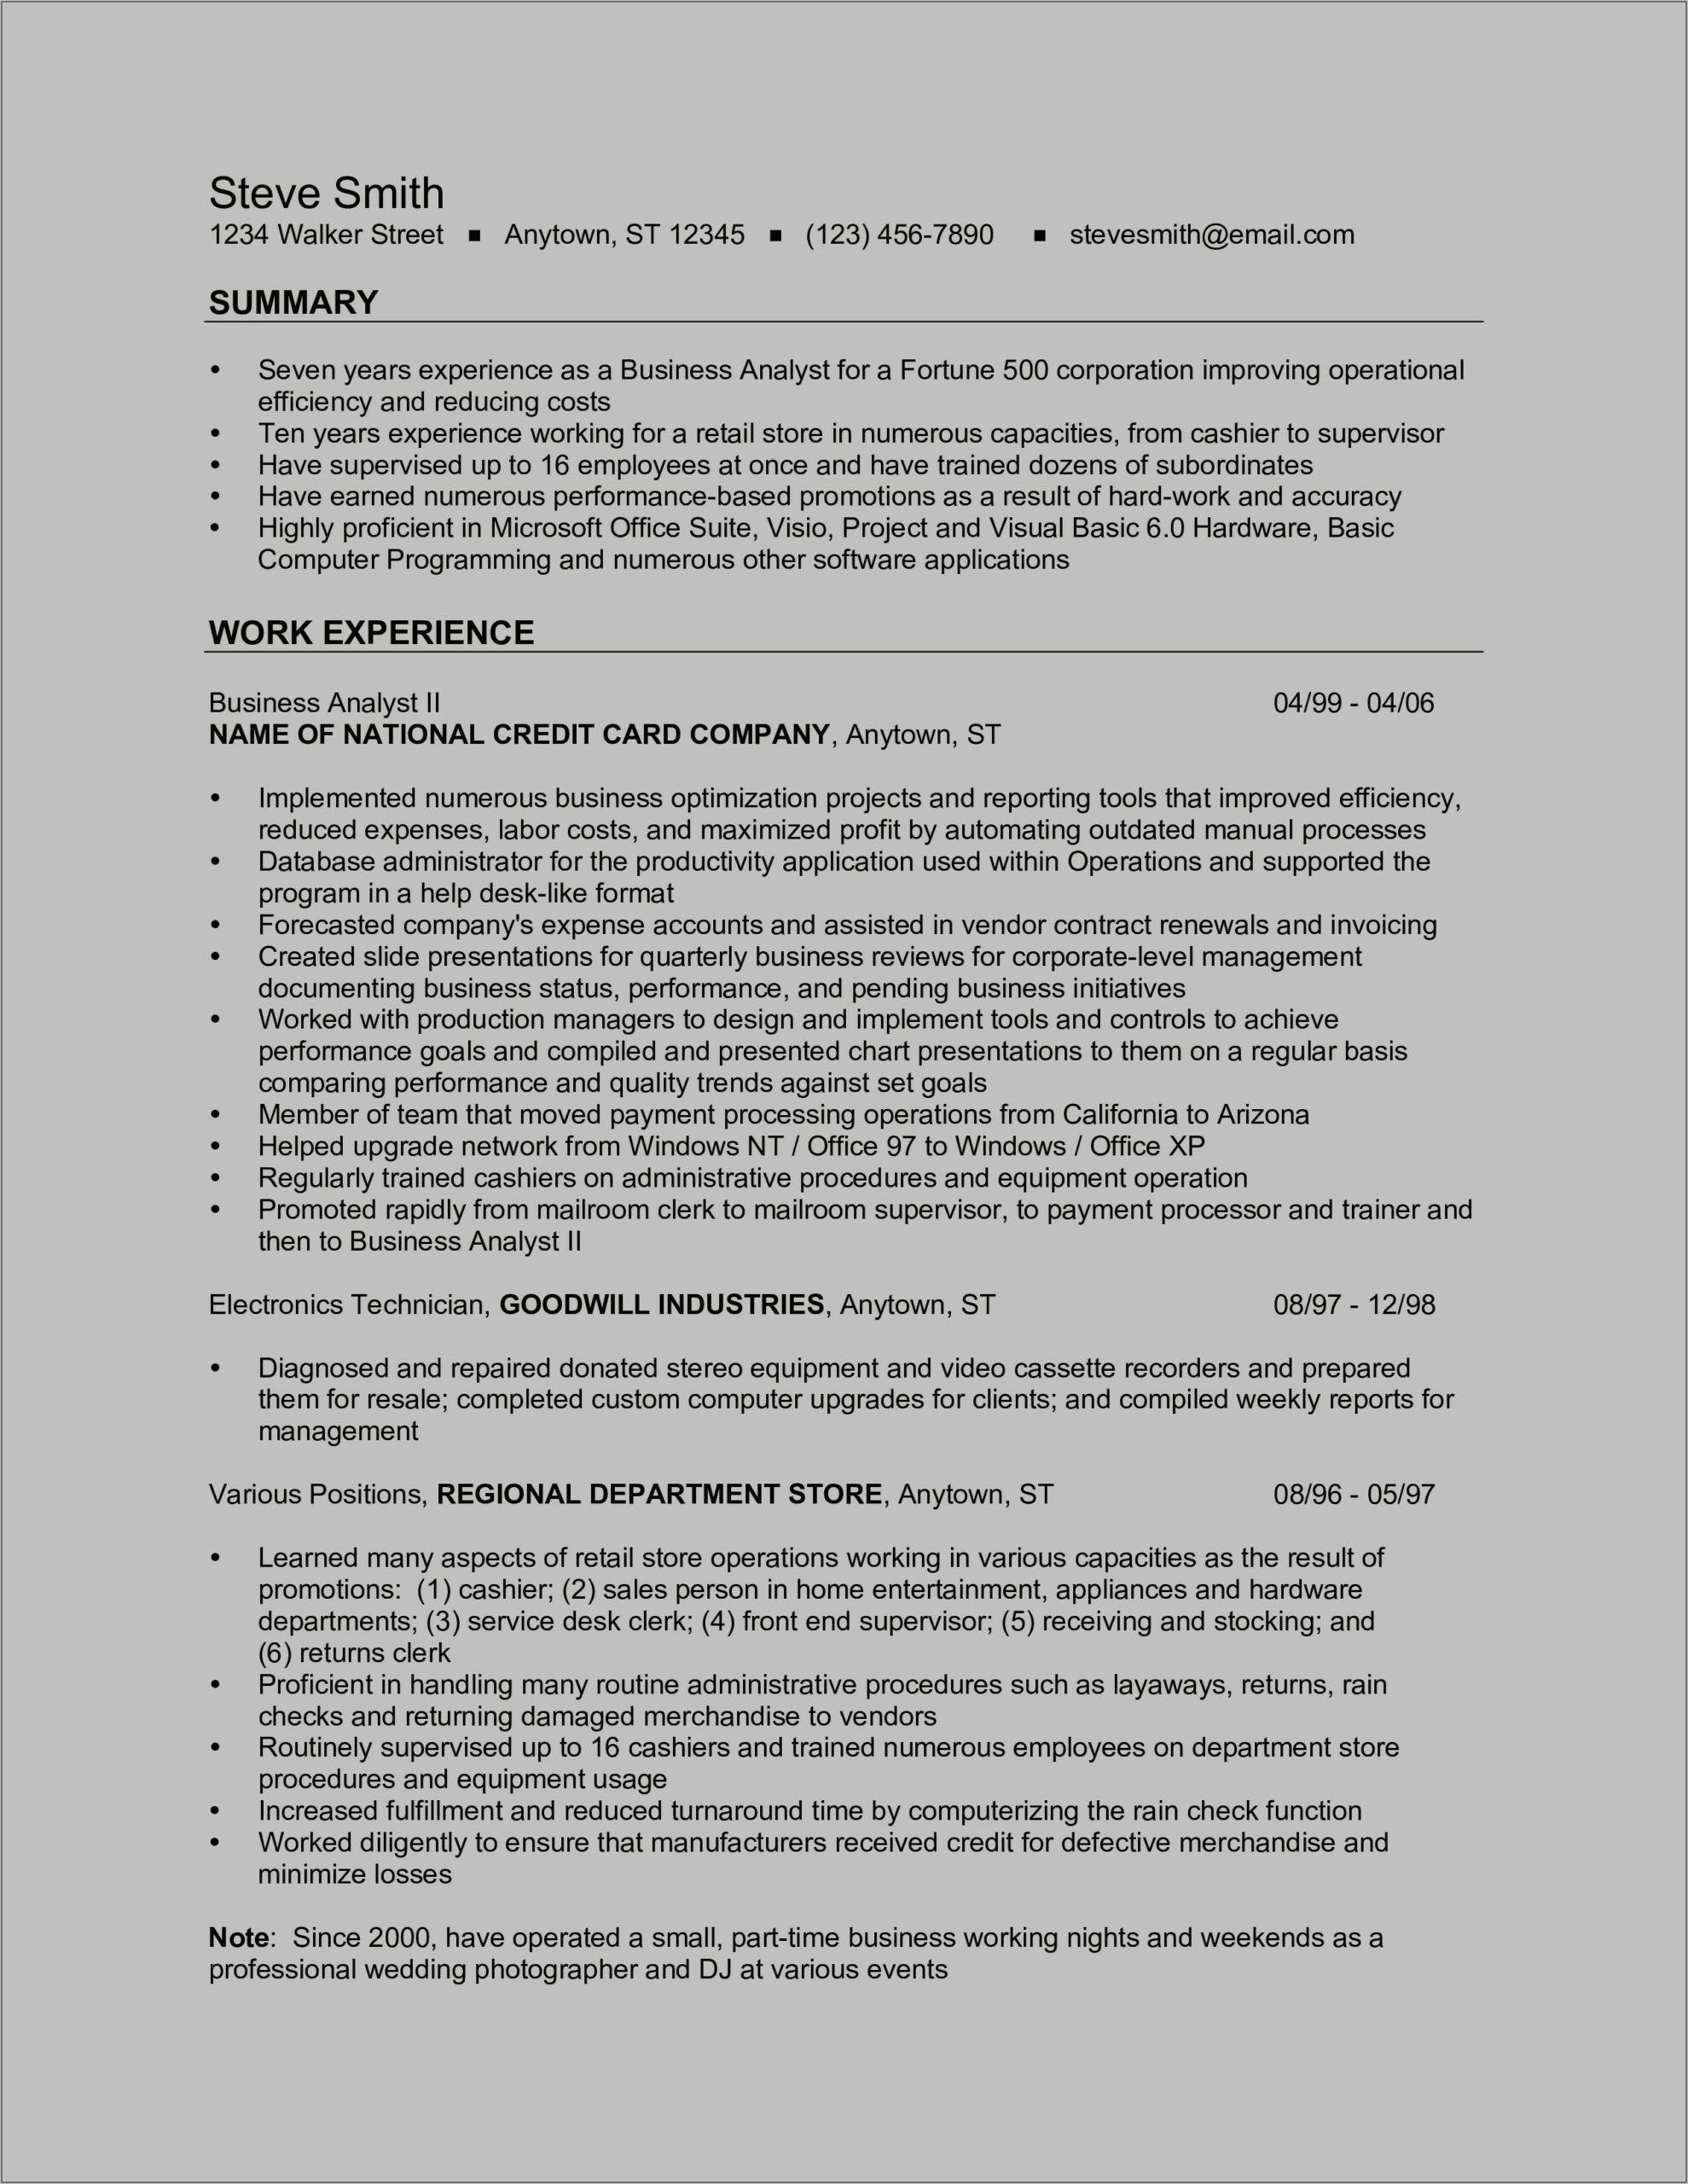 Sample Business Analyst Resume For Retail Industry